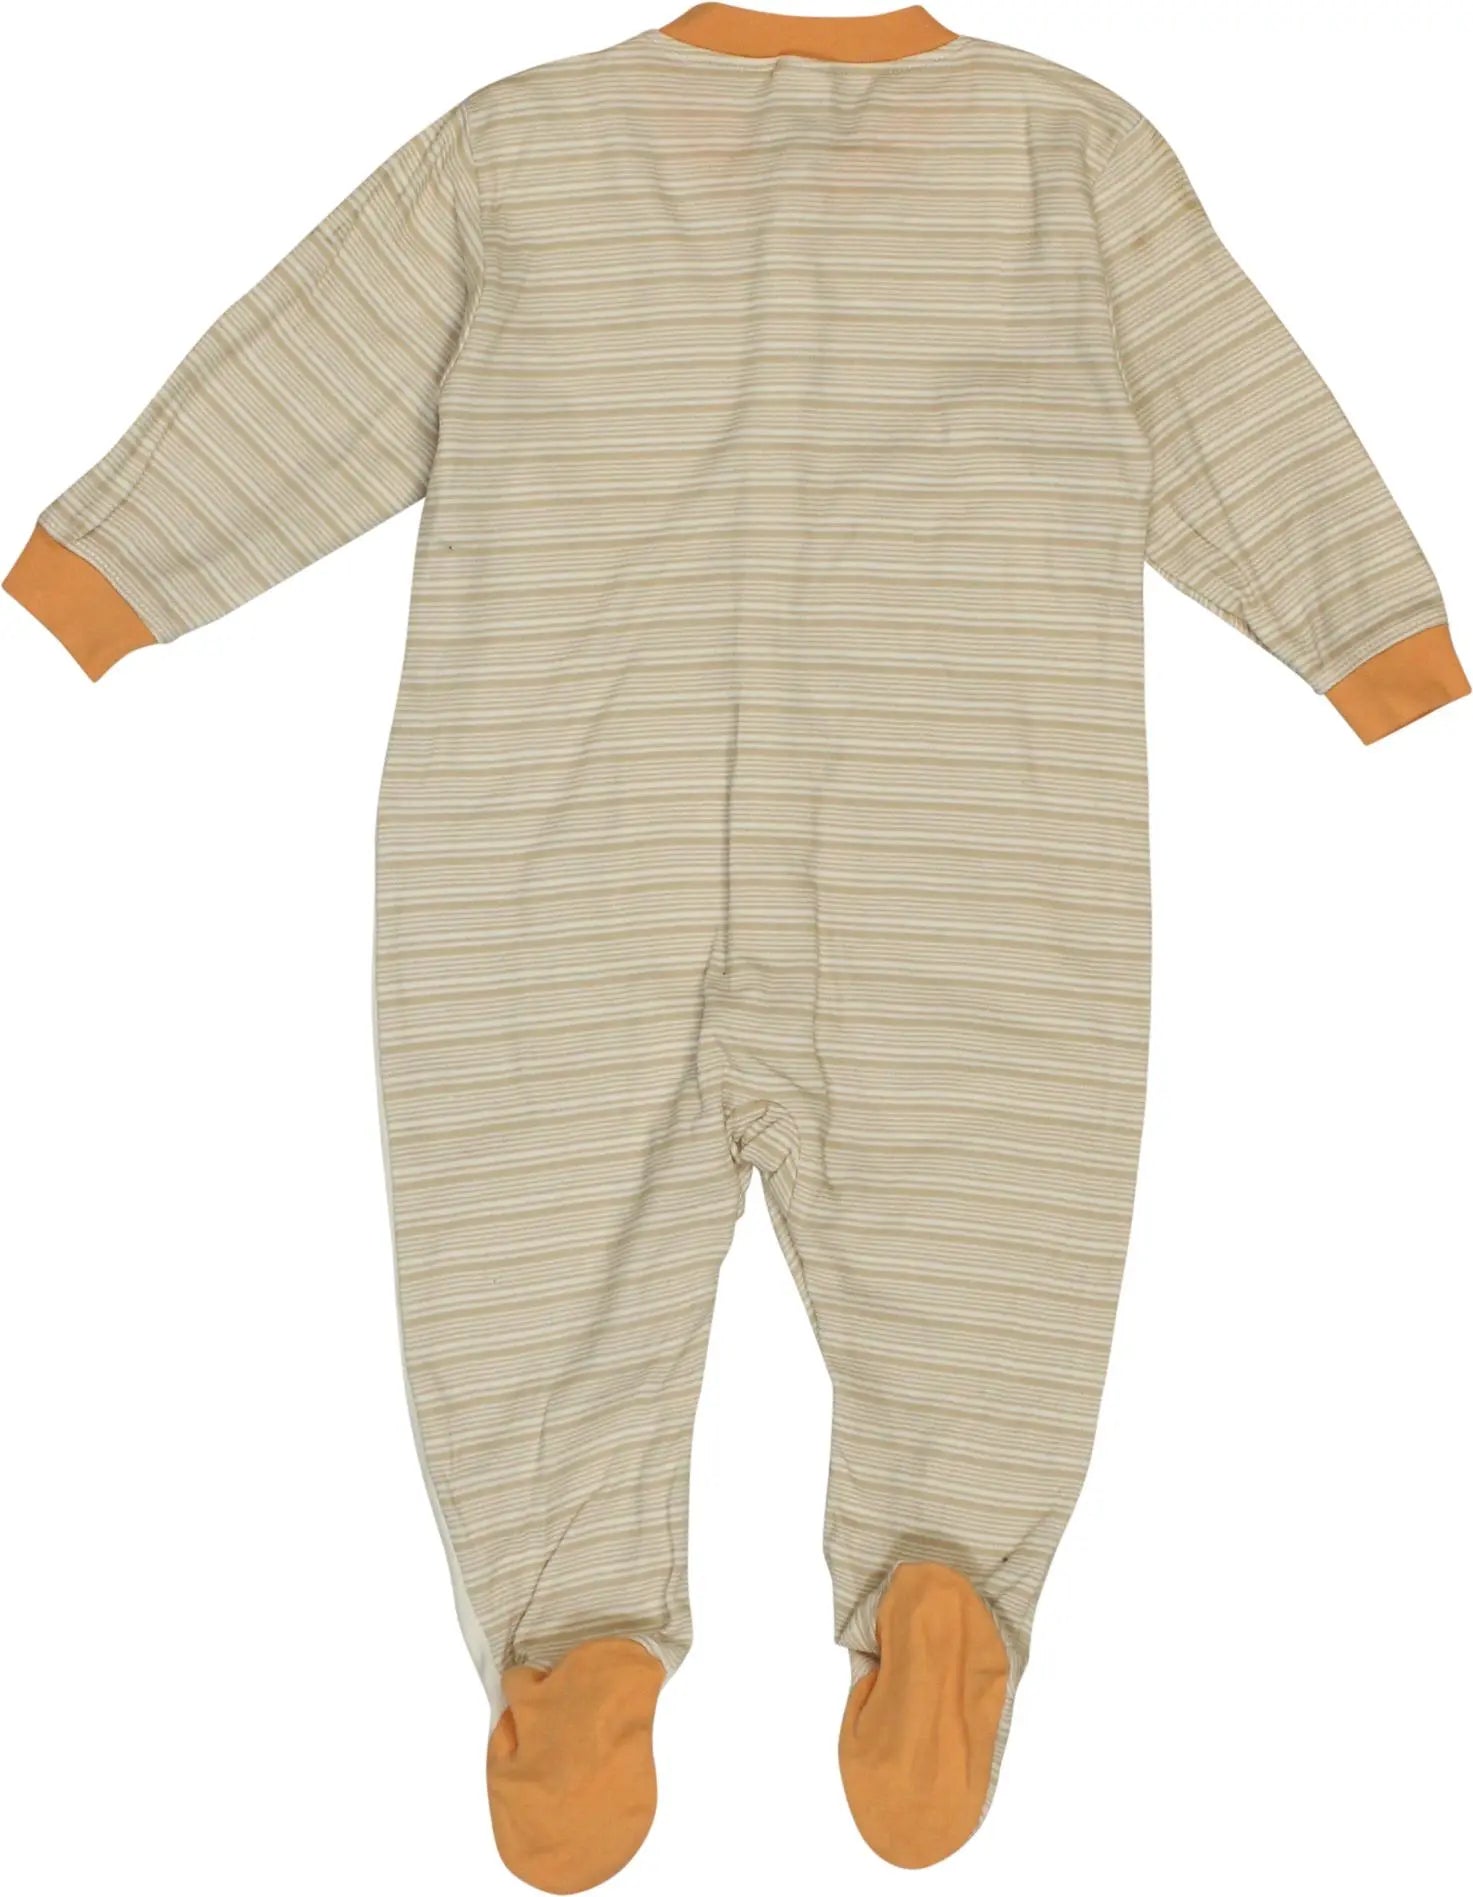 C&A - Sleep Suit- ThriftTale.com - Vintage and second handclothing